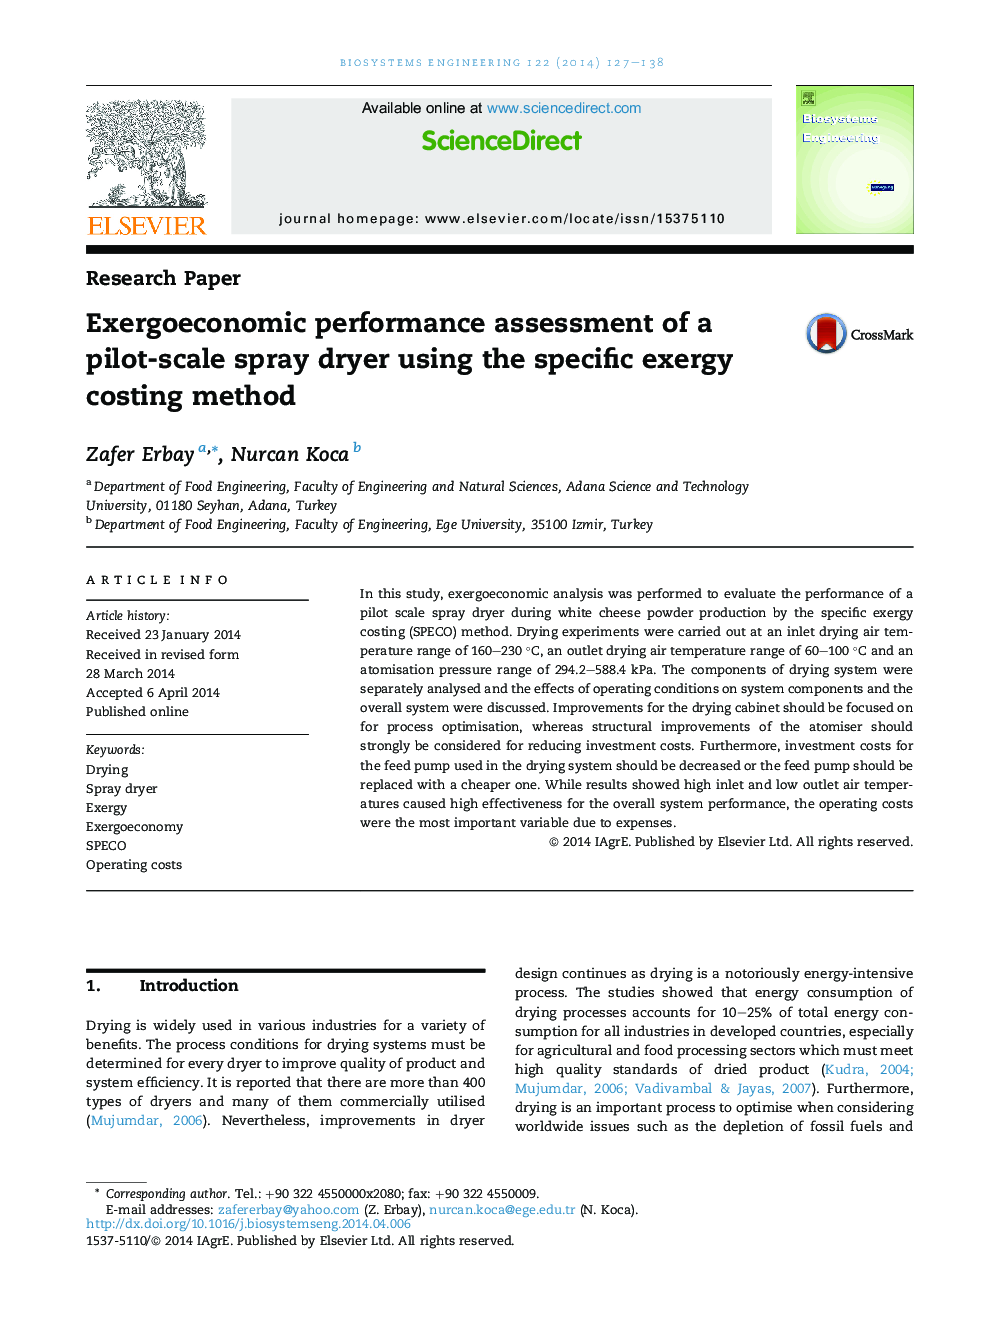 Exergoeconomic performance assessment of a pilot-scale spray dryer using the specific exergy costing method